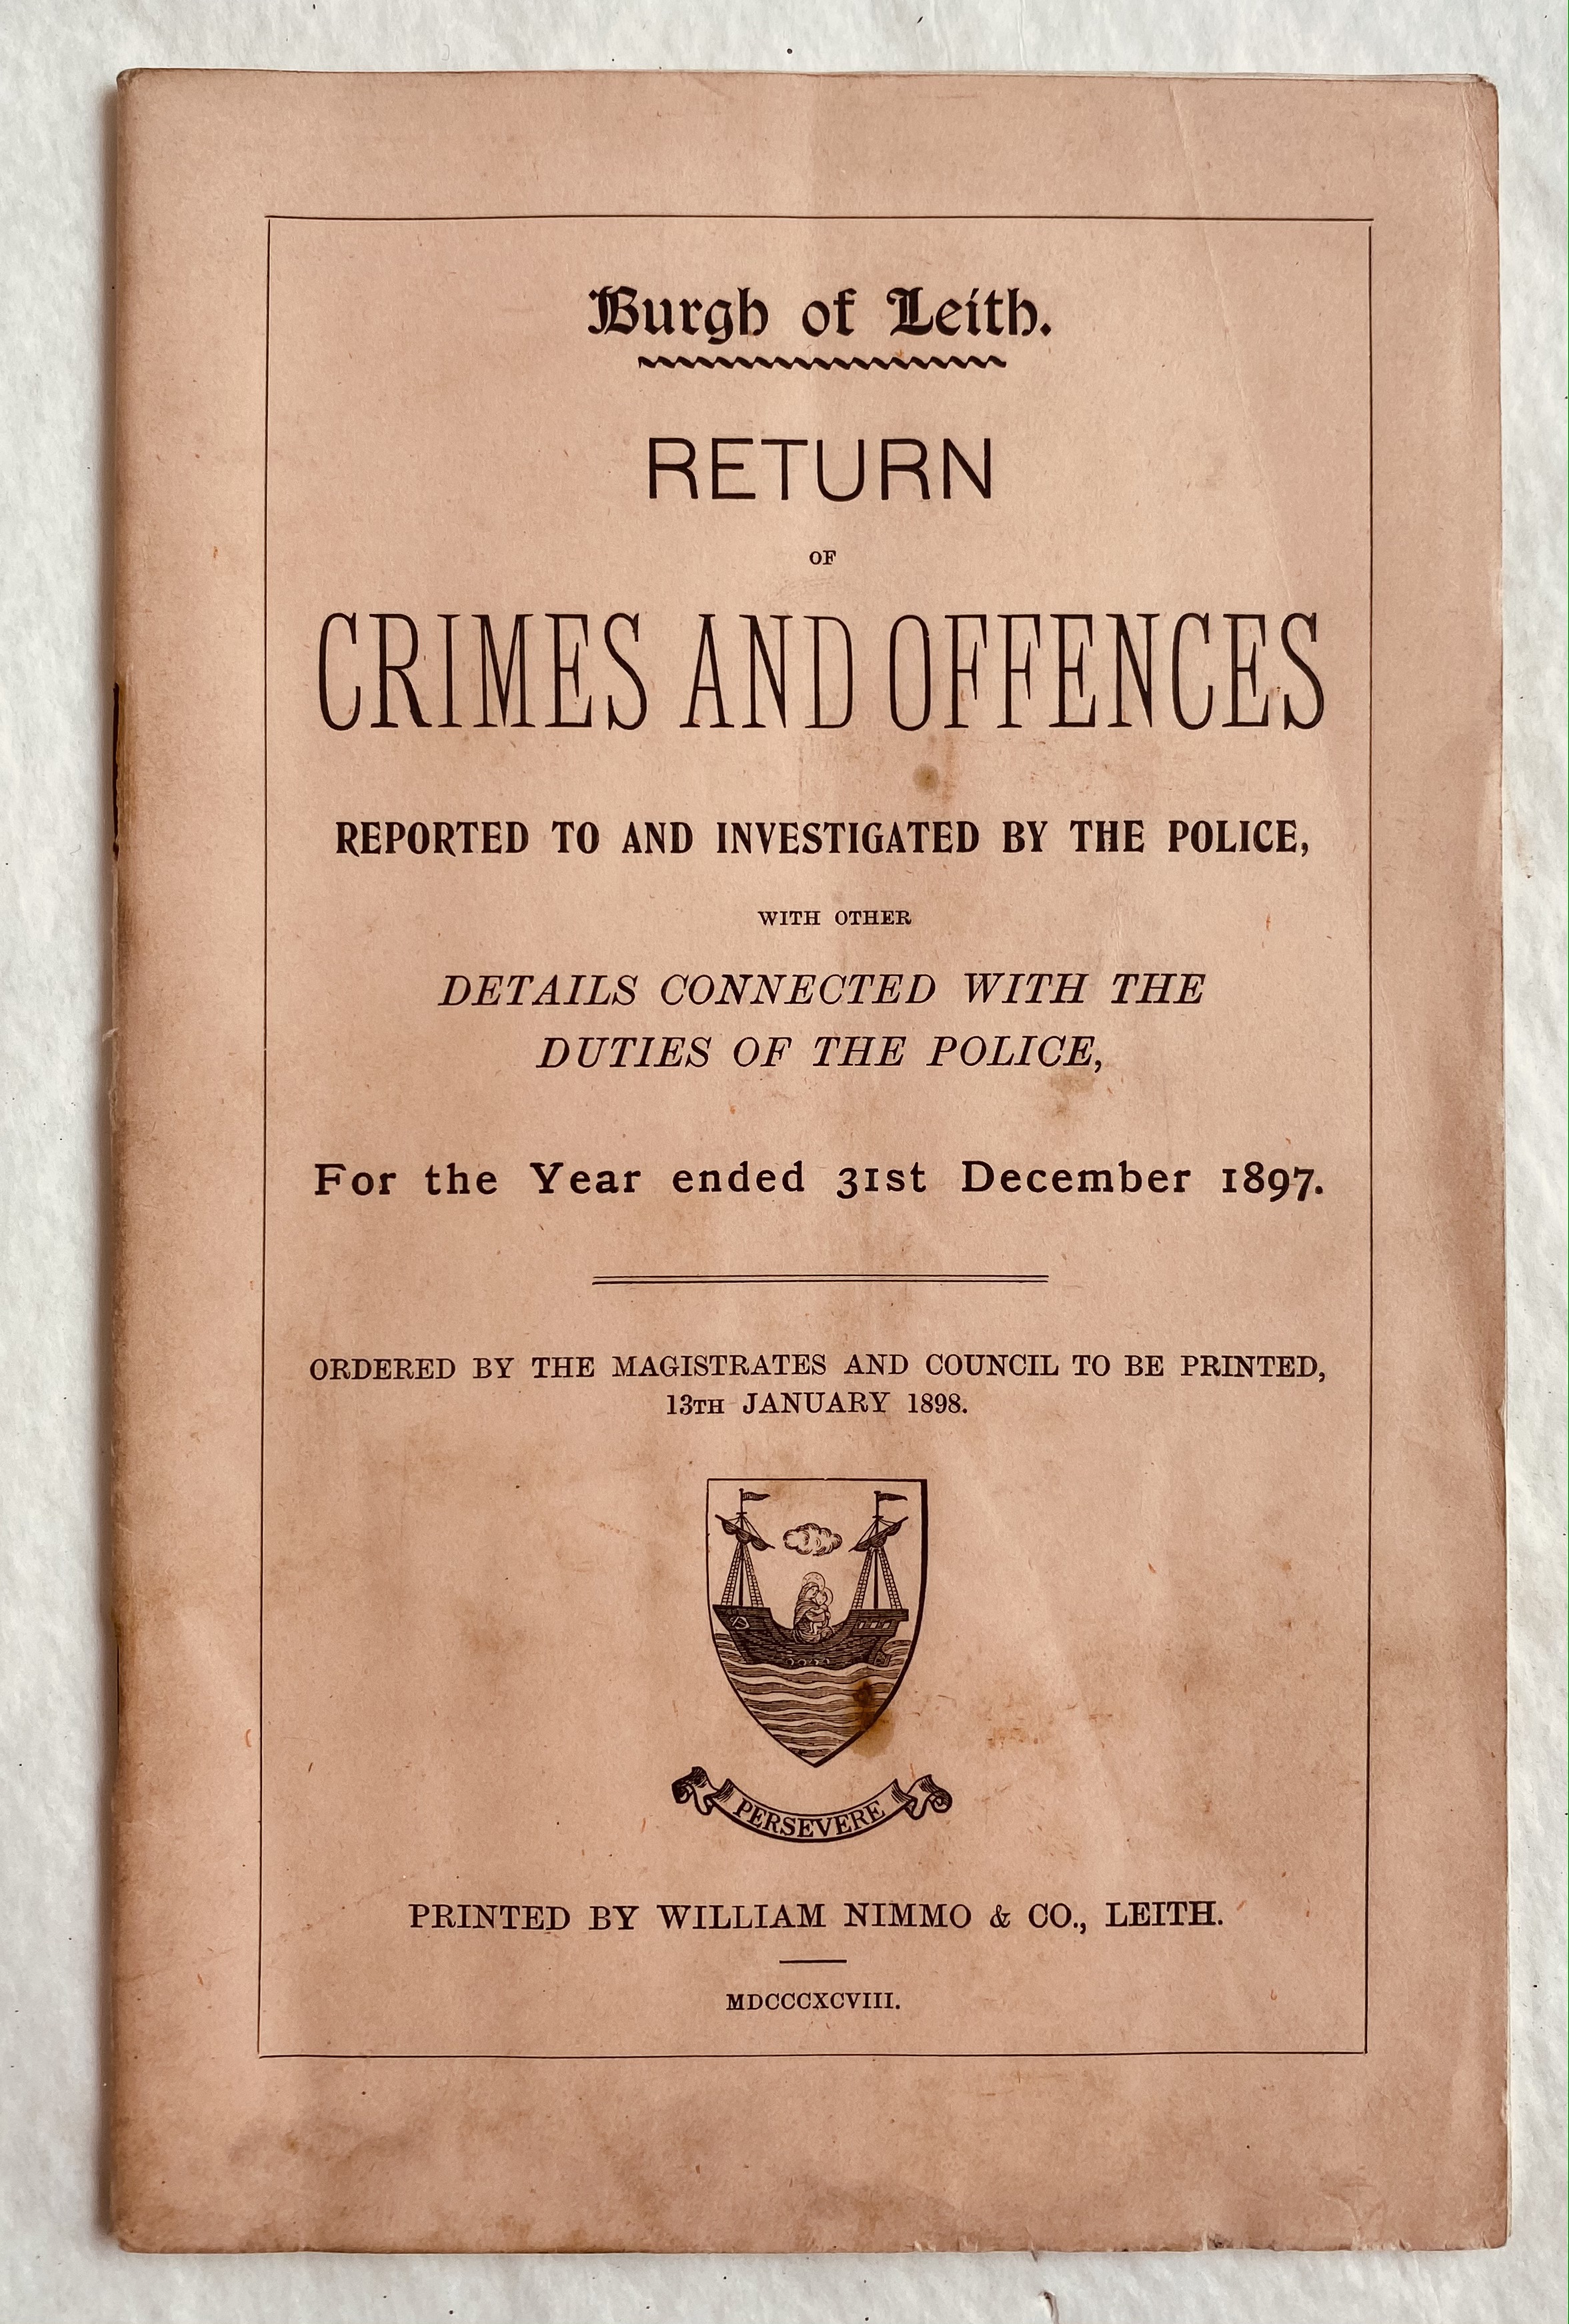 Front cover of Crimes and Offences booklet from 1897.